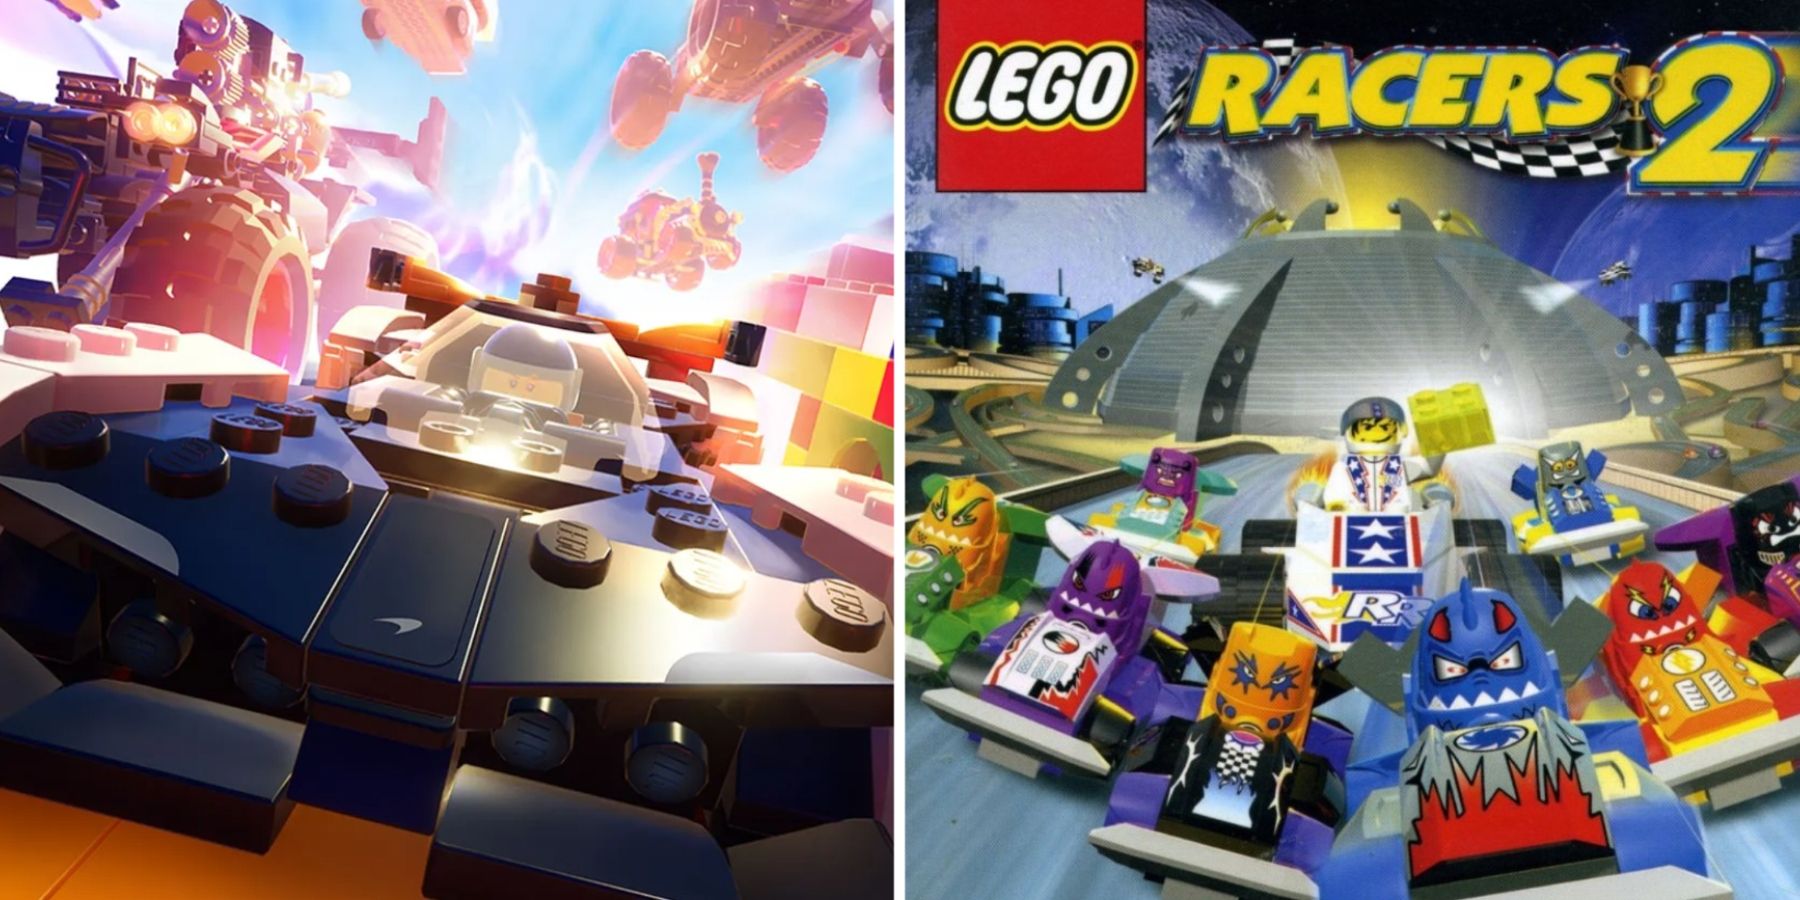 Skynd dig grund muskel LEGO 2K Drive Is Taking Two of the Best Features From LEGO Racers 2